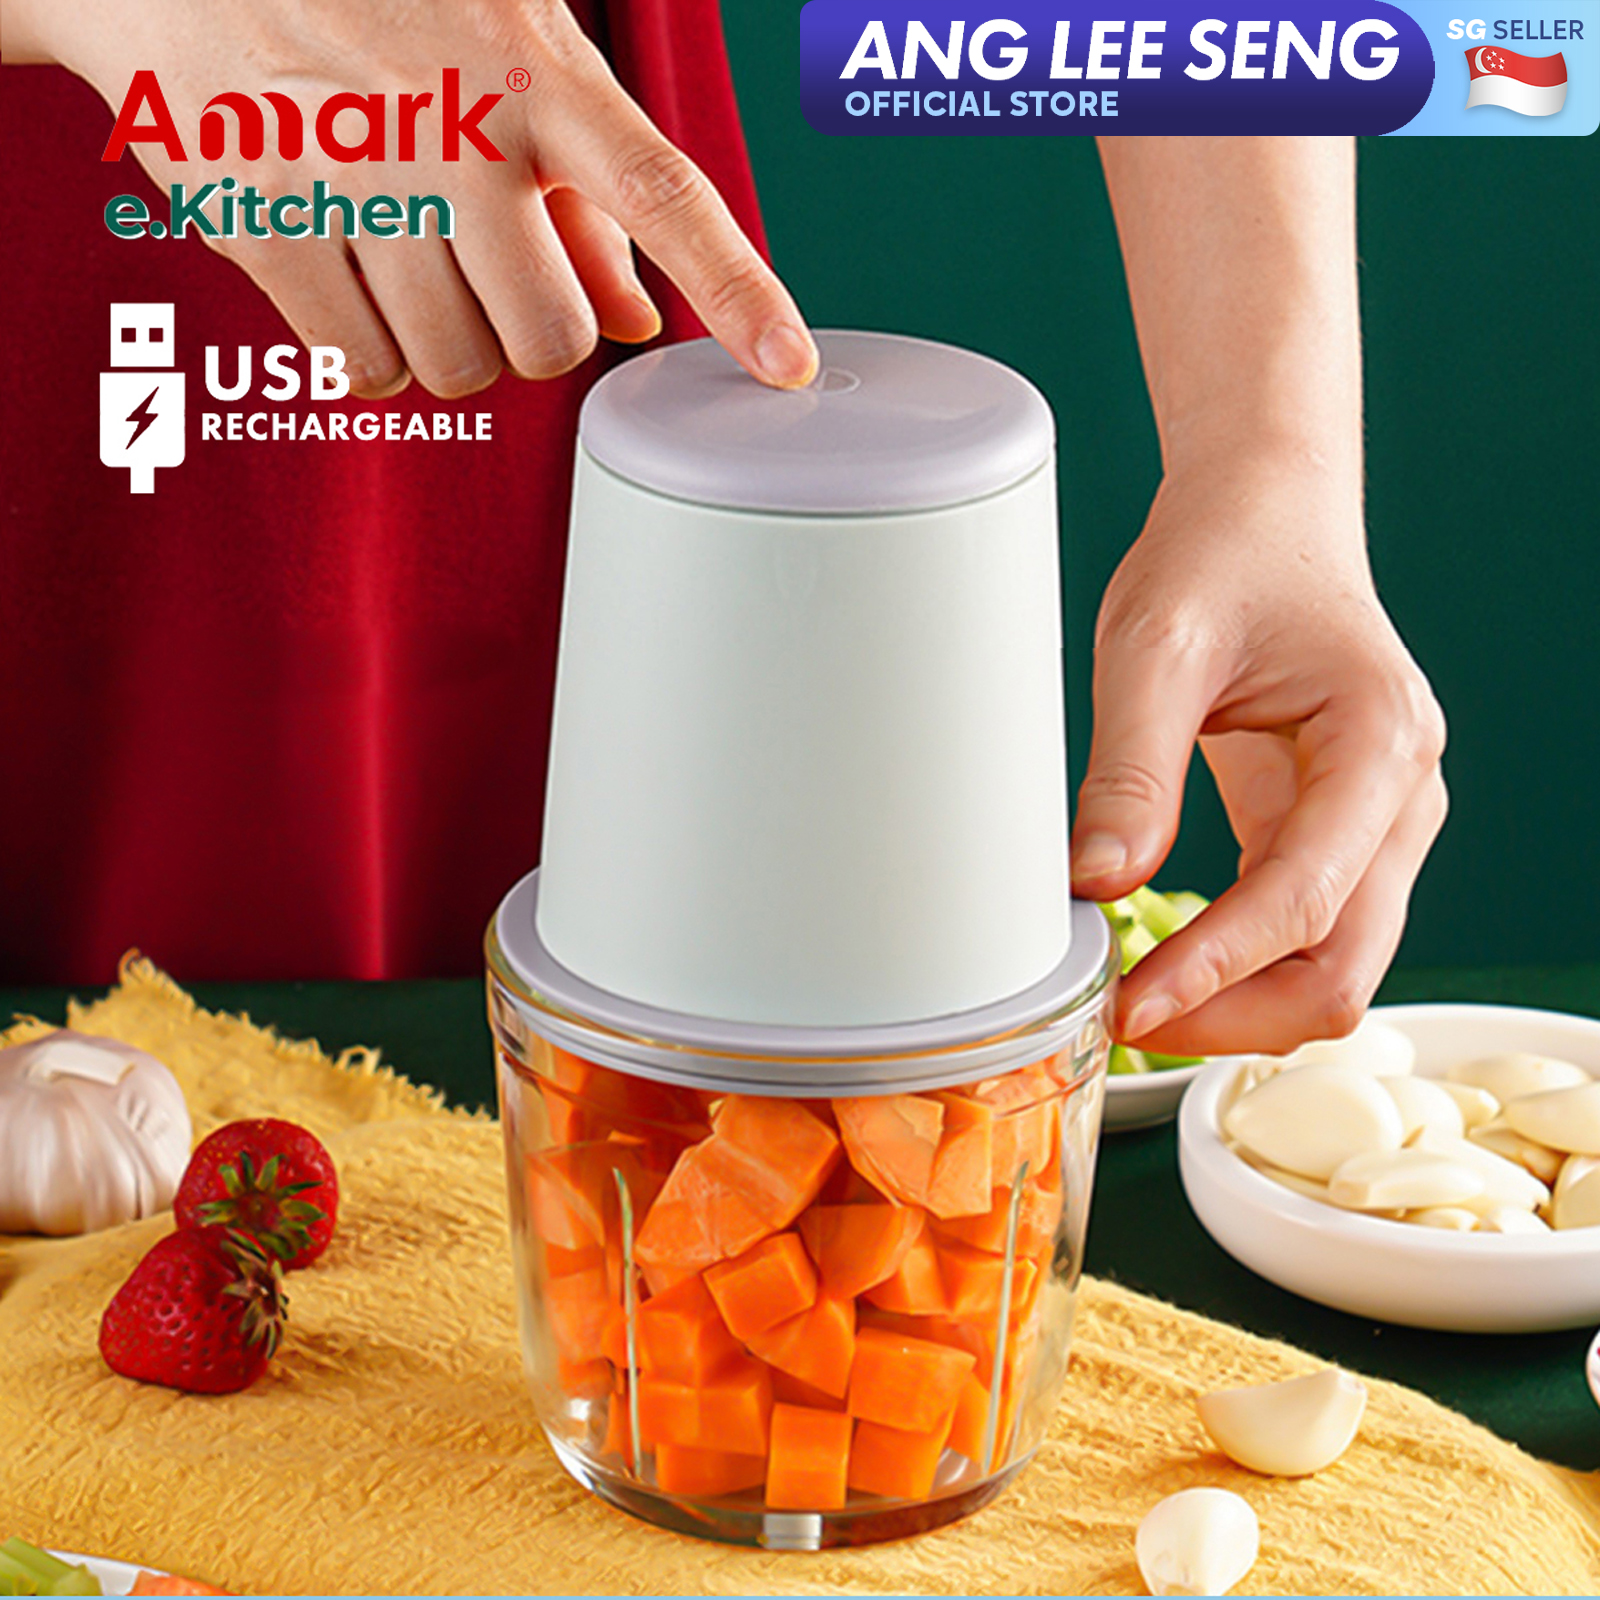 Amark e.Kitchen Cordless USB-Rechargeable Mini Food Chopper with 600ml Glass Bowl